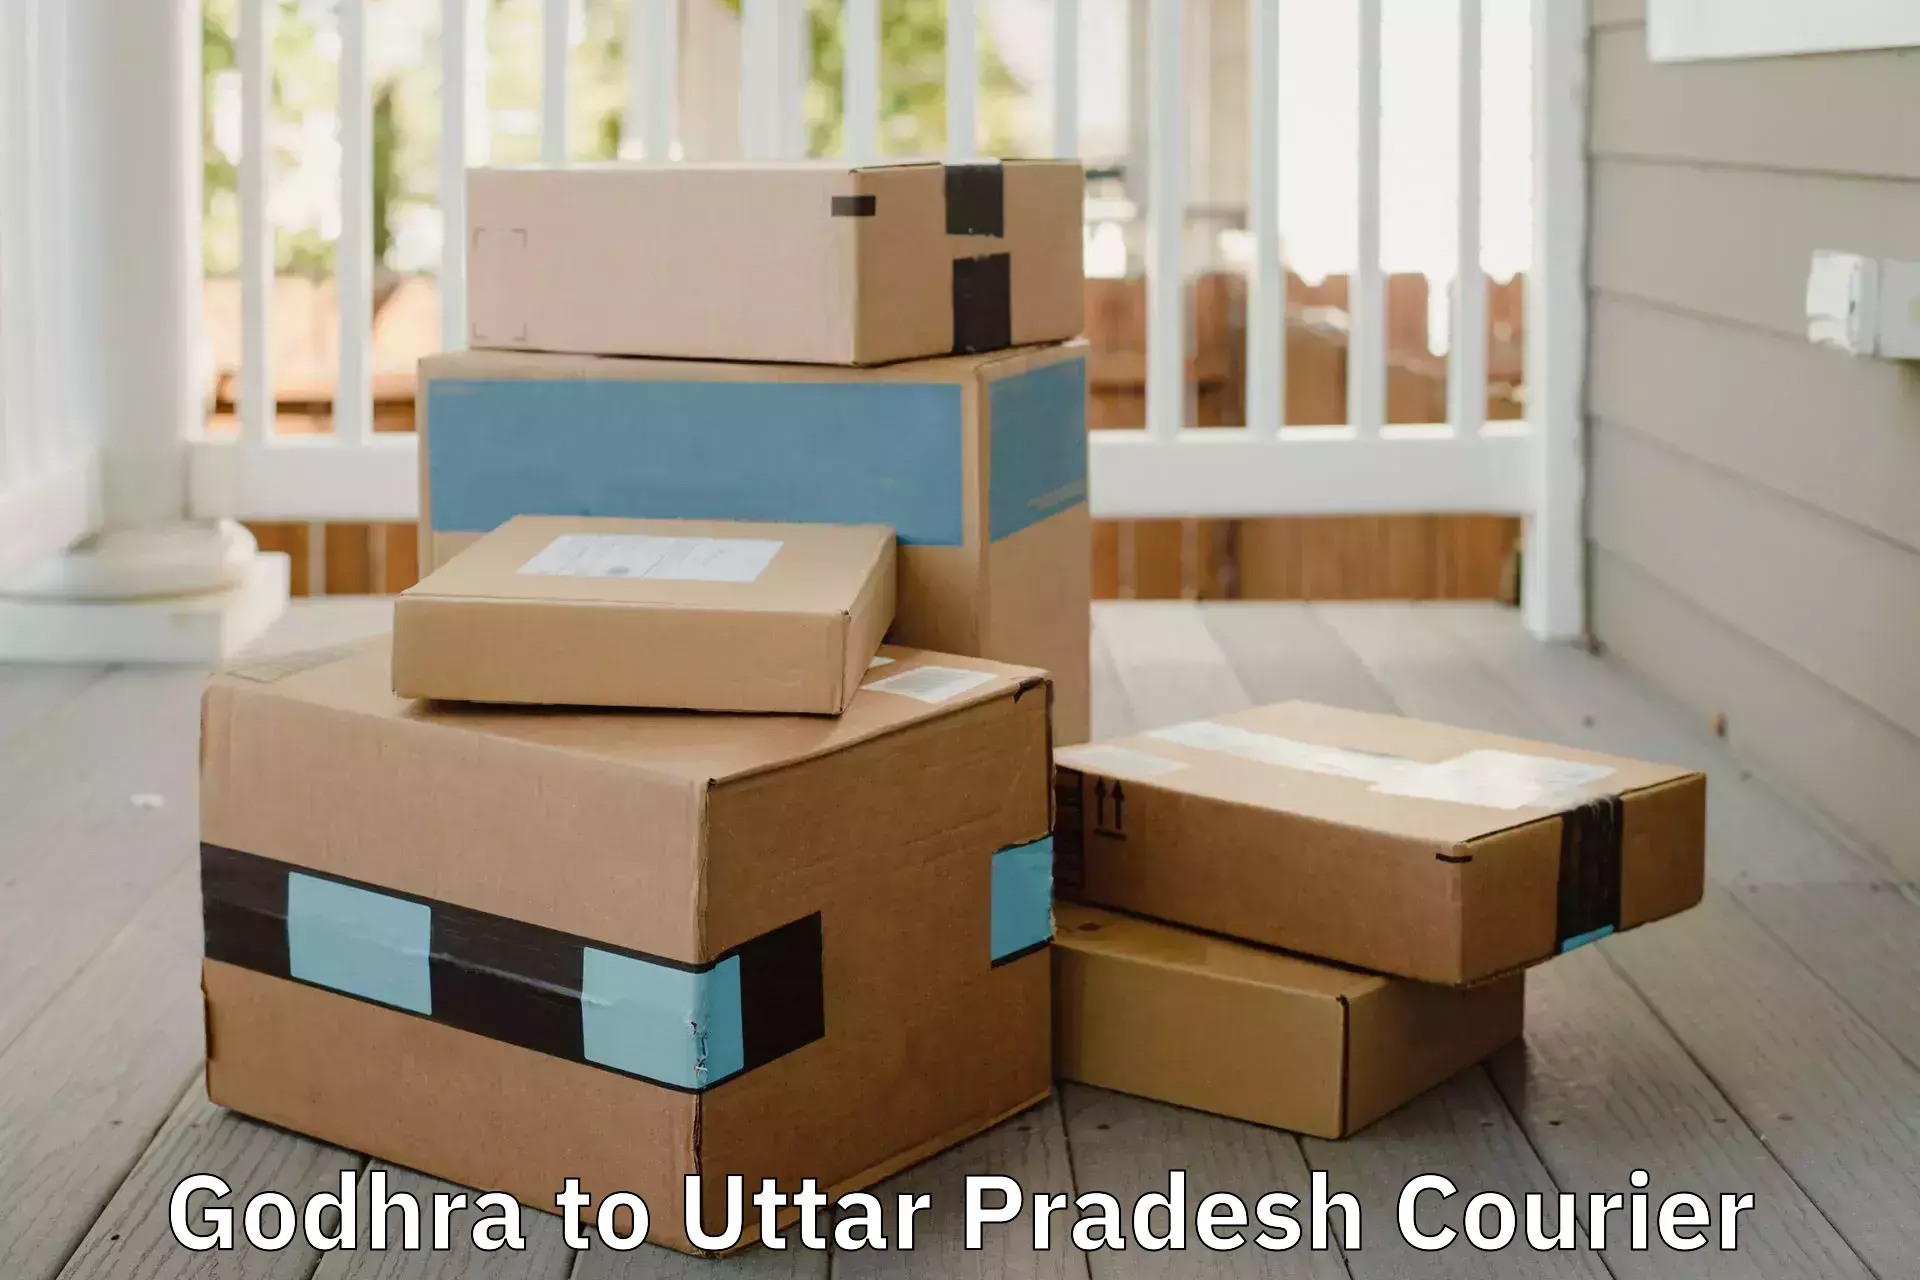 Hassle-free relocation Godhra to Dhaurahara